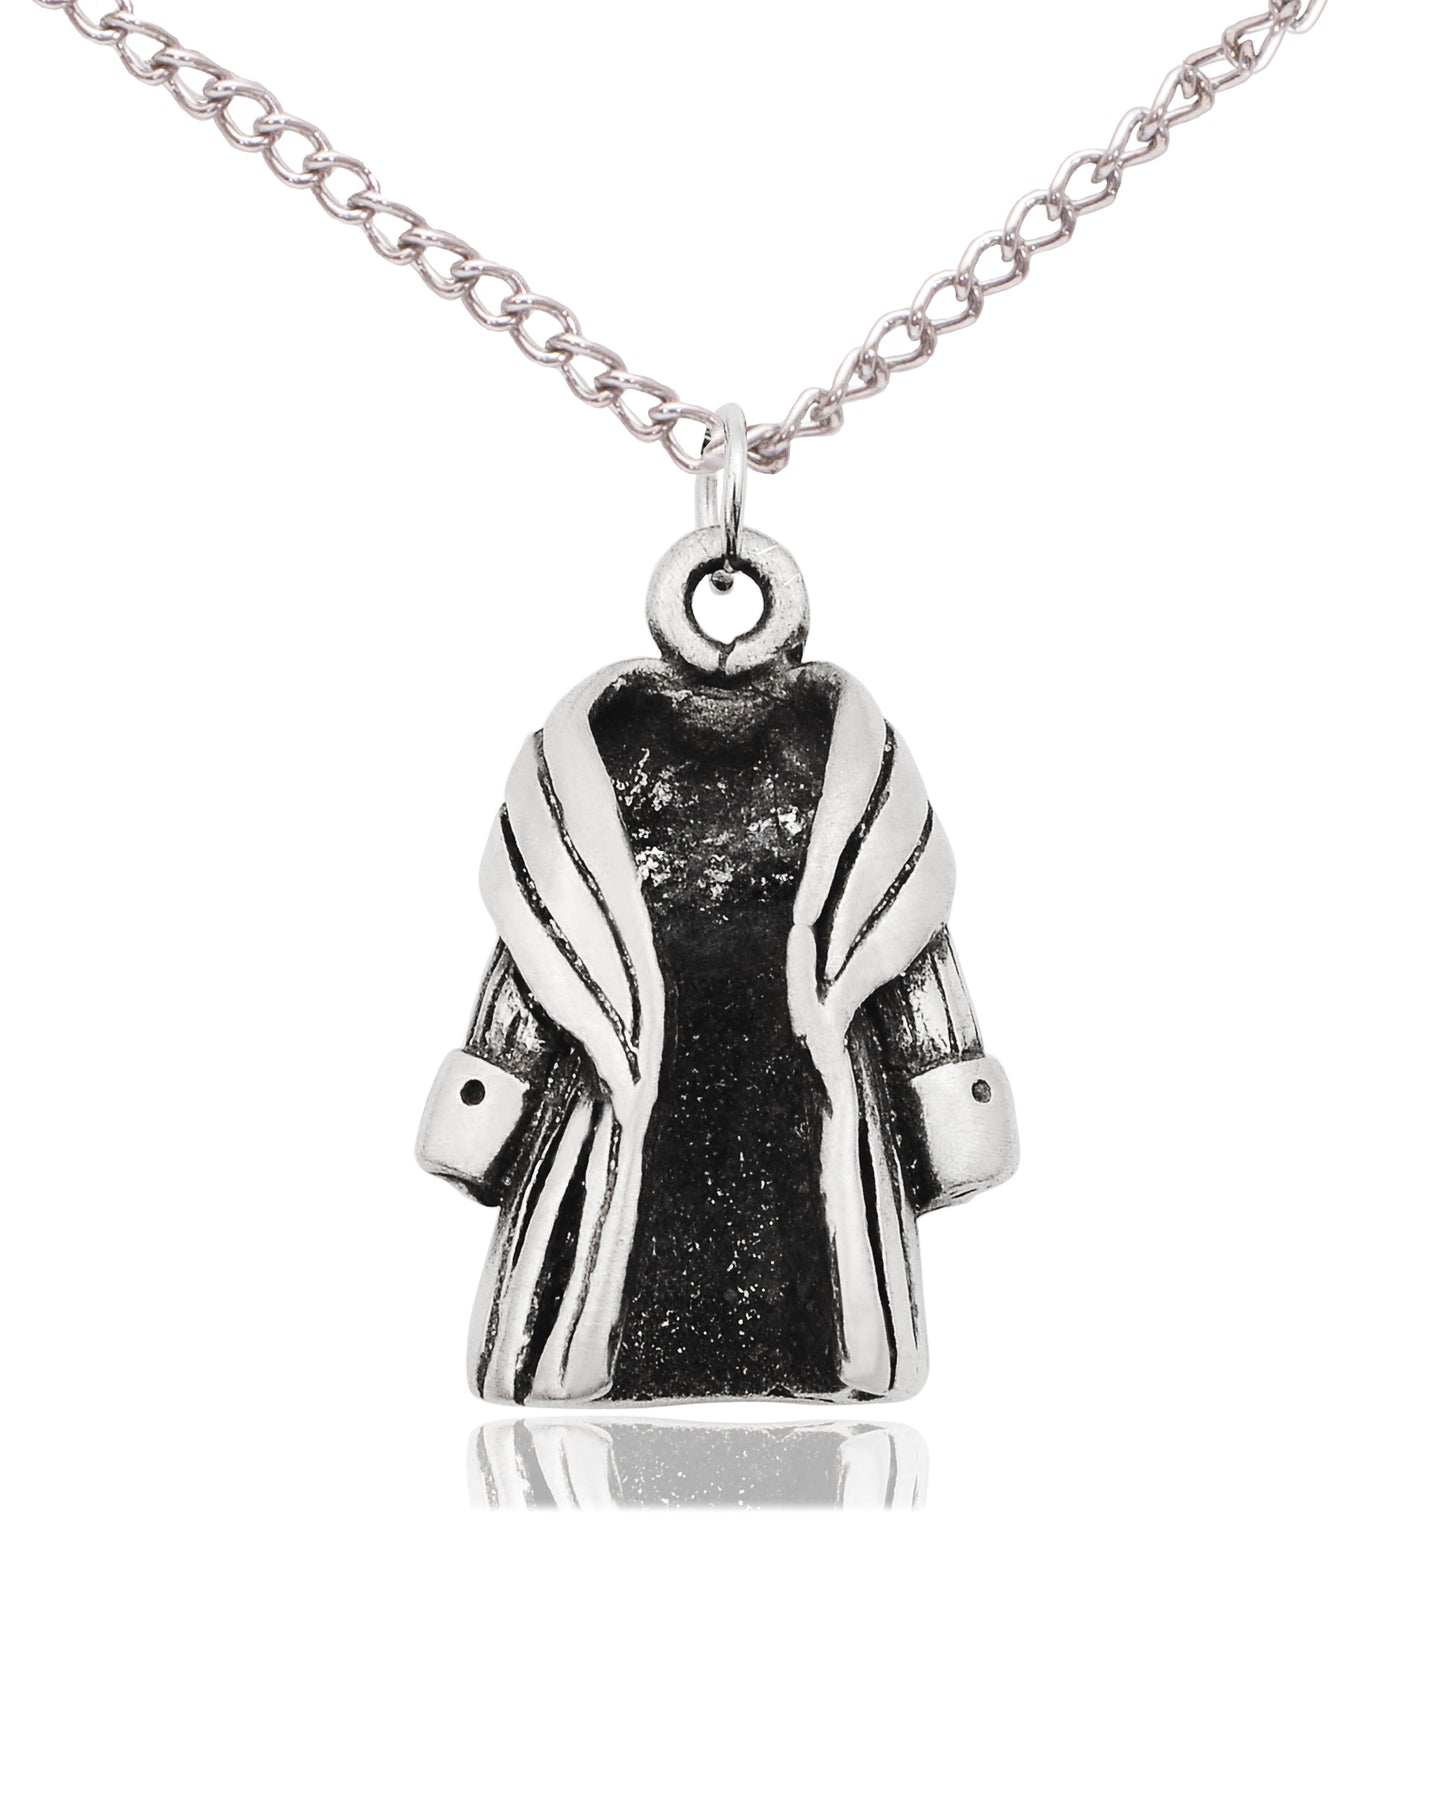 Winter & Fur Coat Silver Pewter Gold Brass Charm Necklace Pendant Jewelry